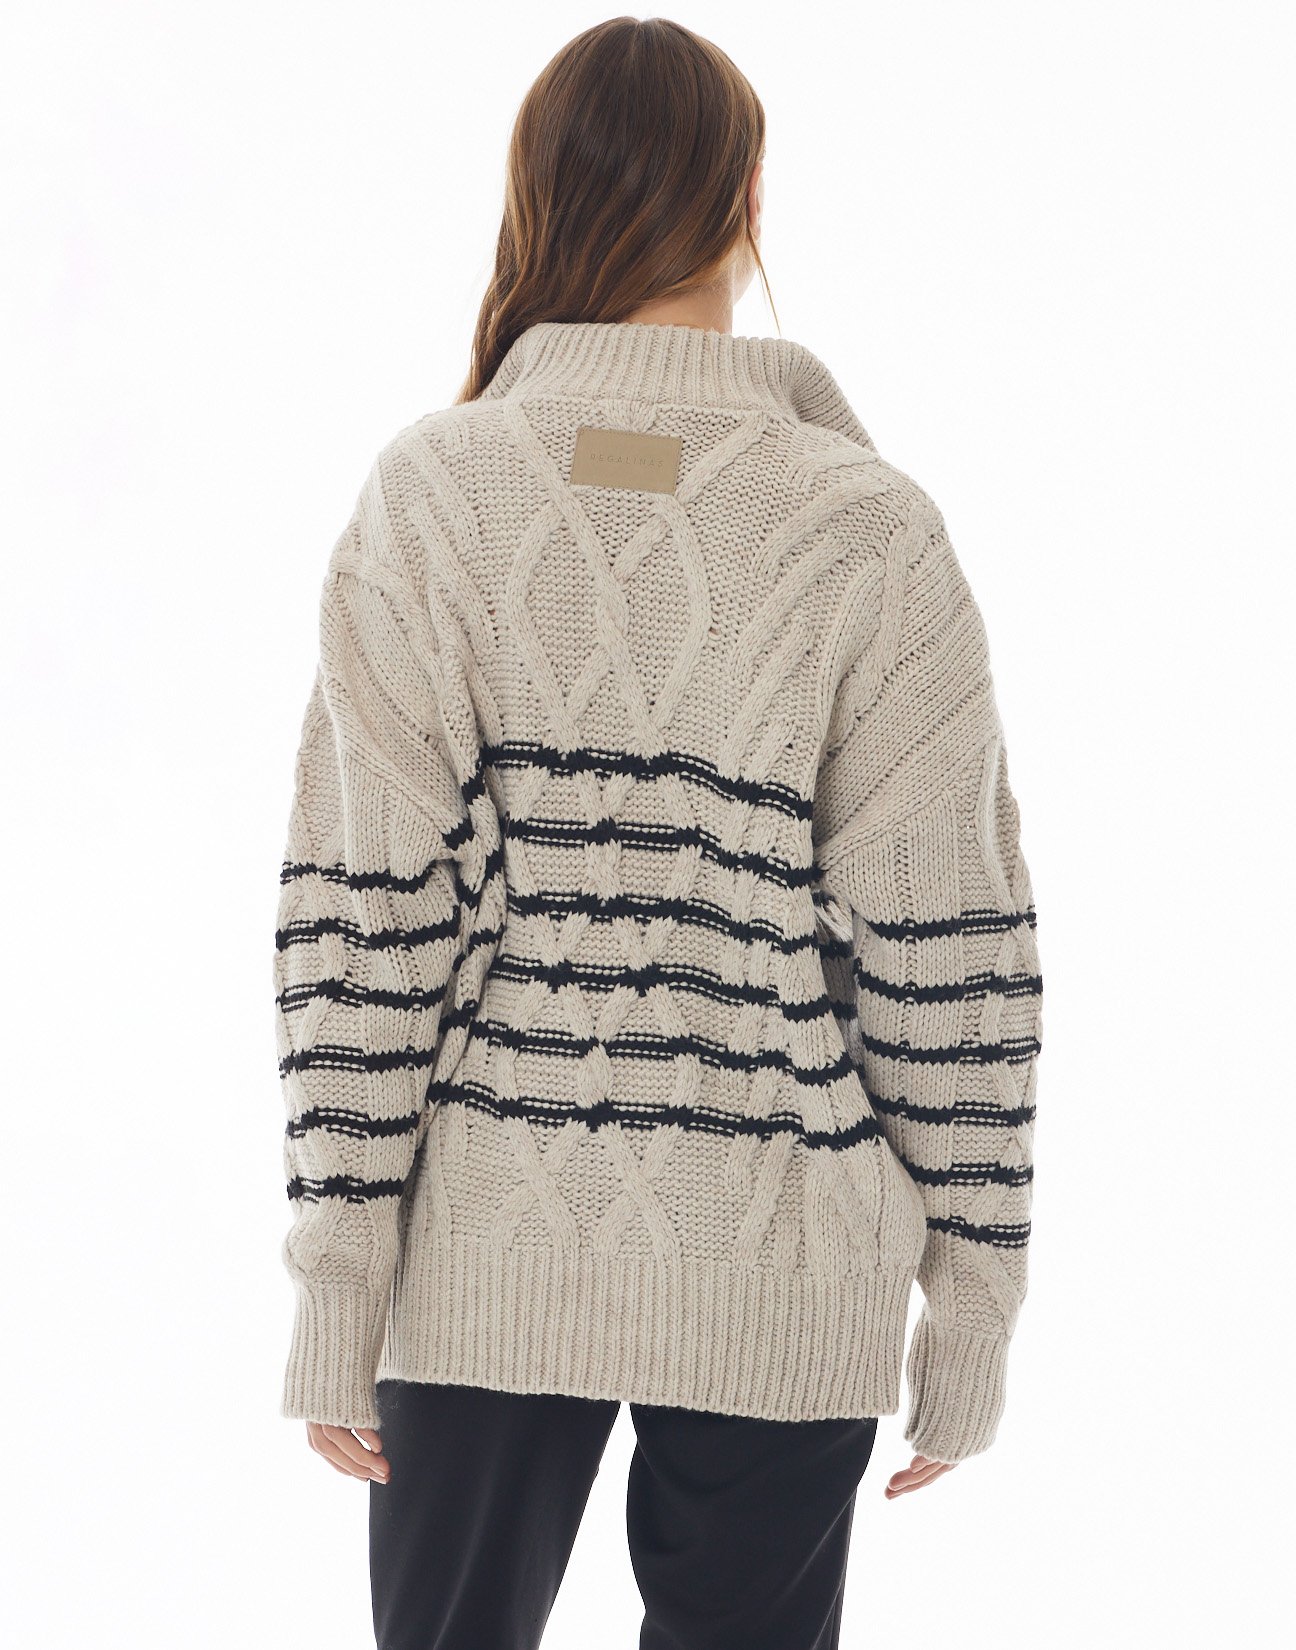 Knit sweater with zip